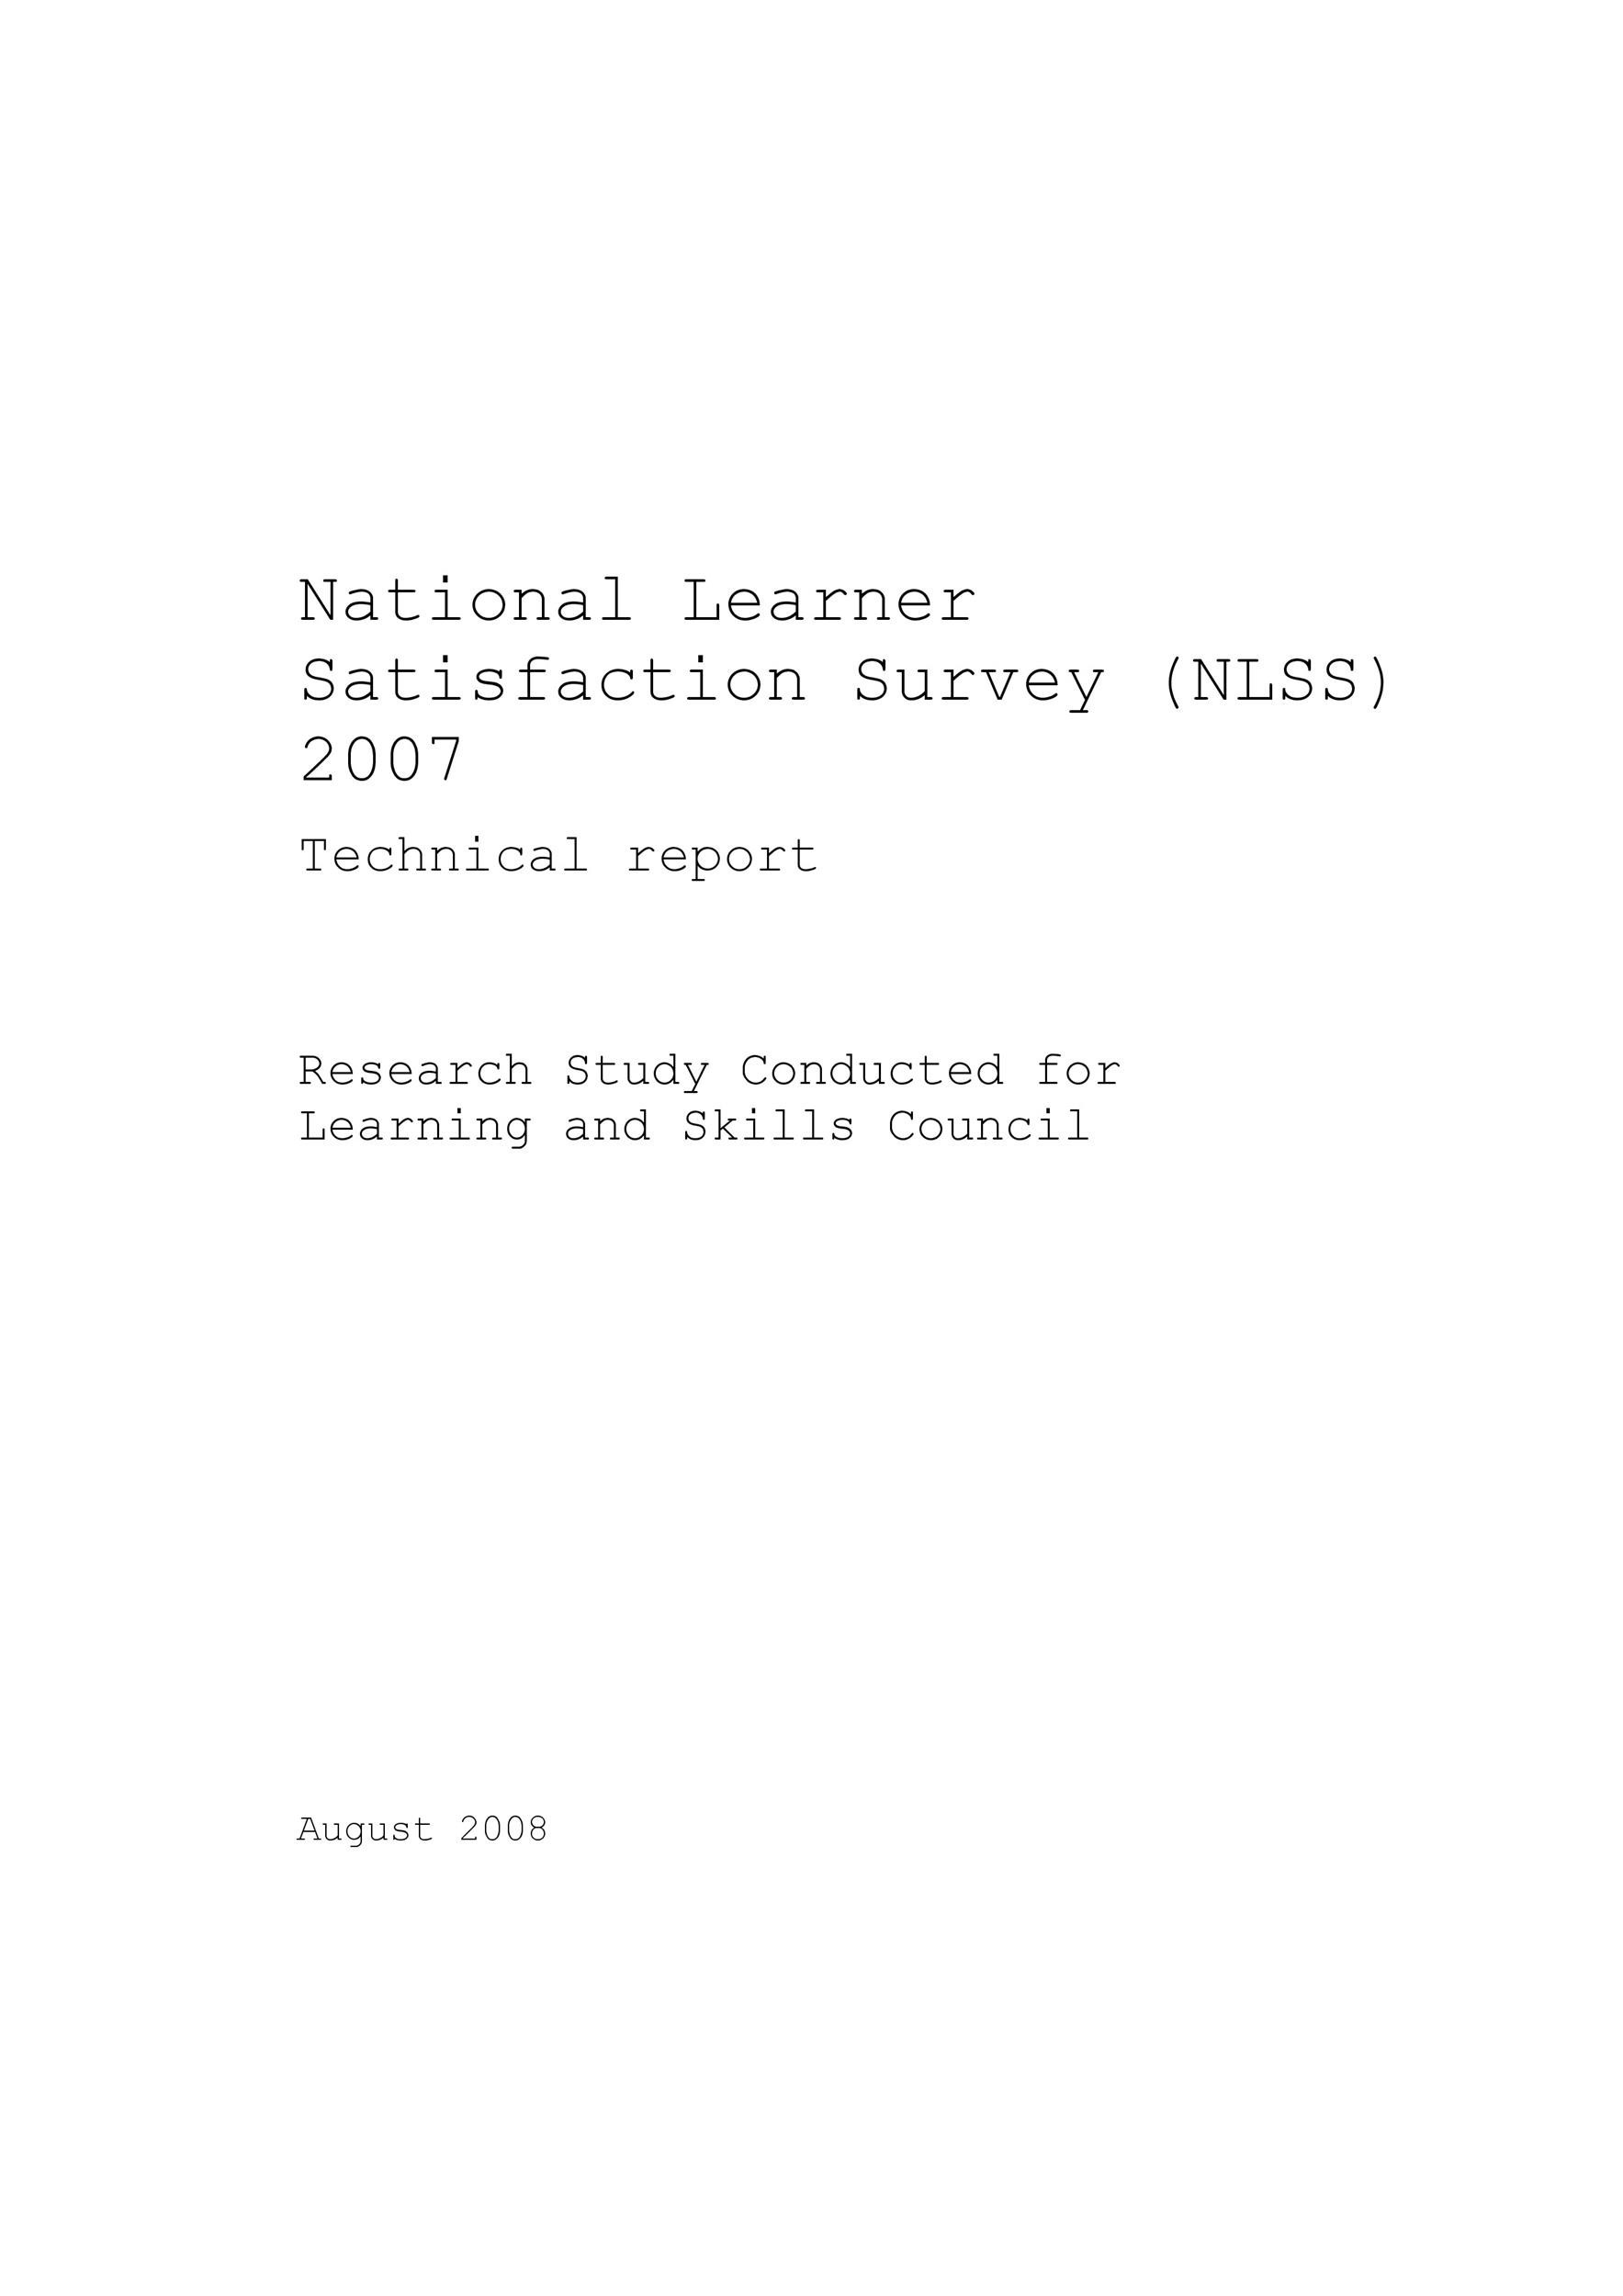 Free technical report template 38